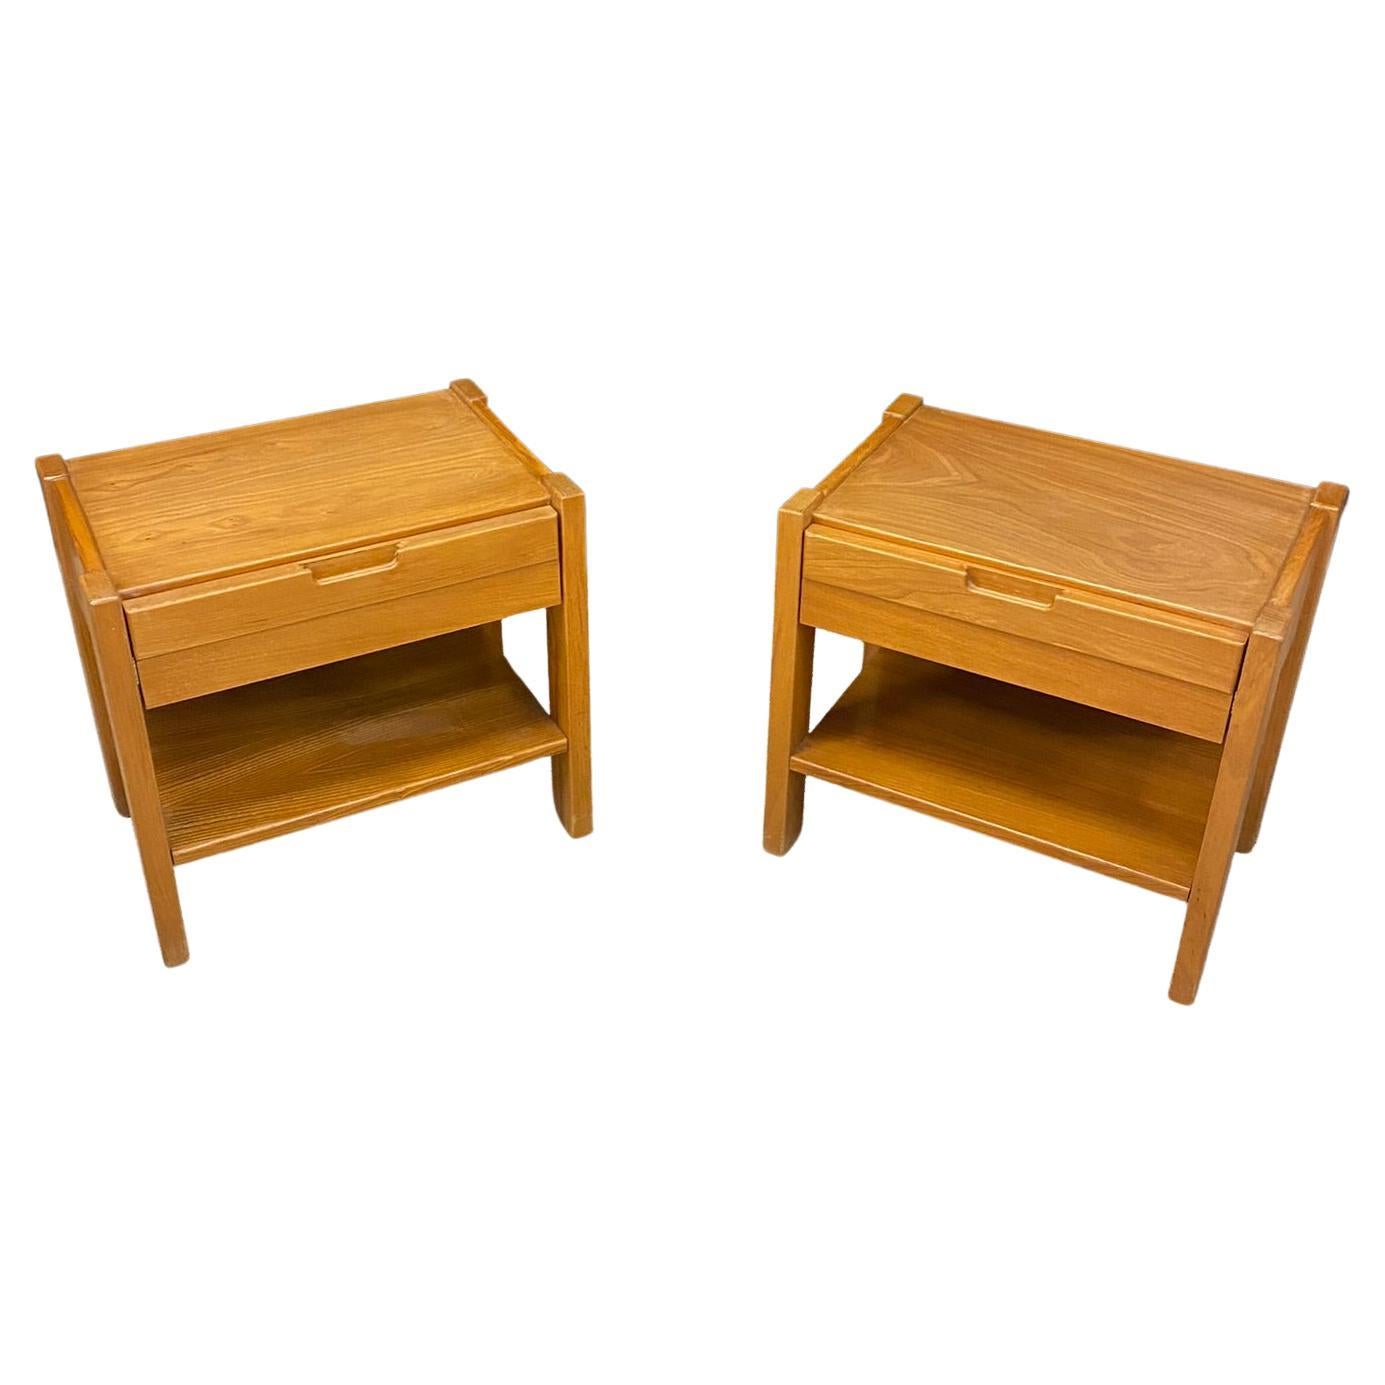 Maison Regain two Bedside Tables in Solid Elm, circa 1960 Pierre Chapo Style For Sale